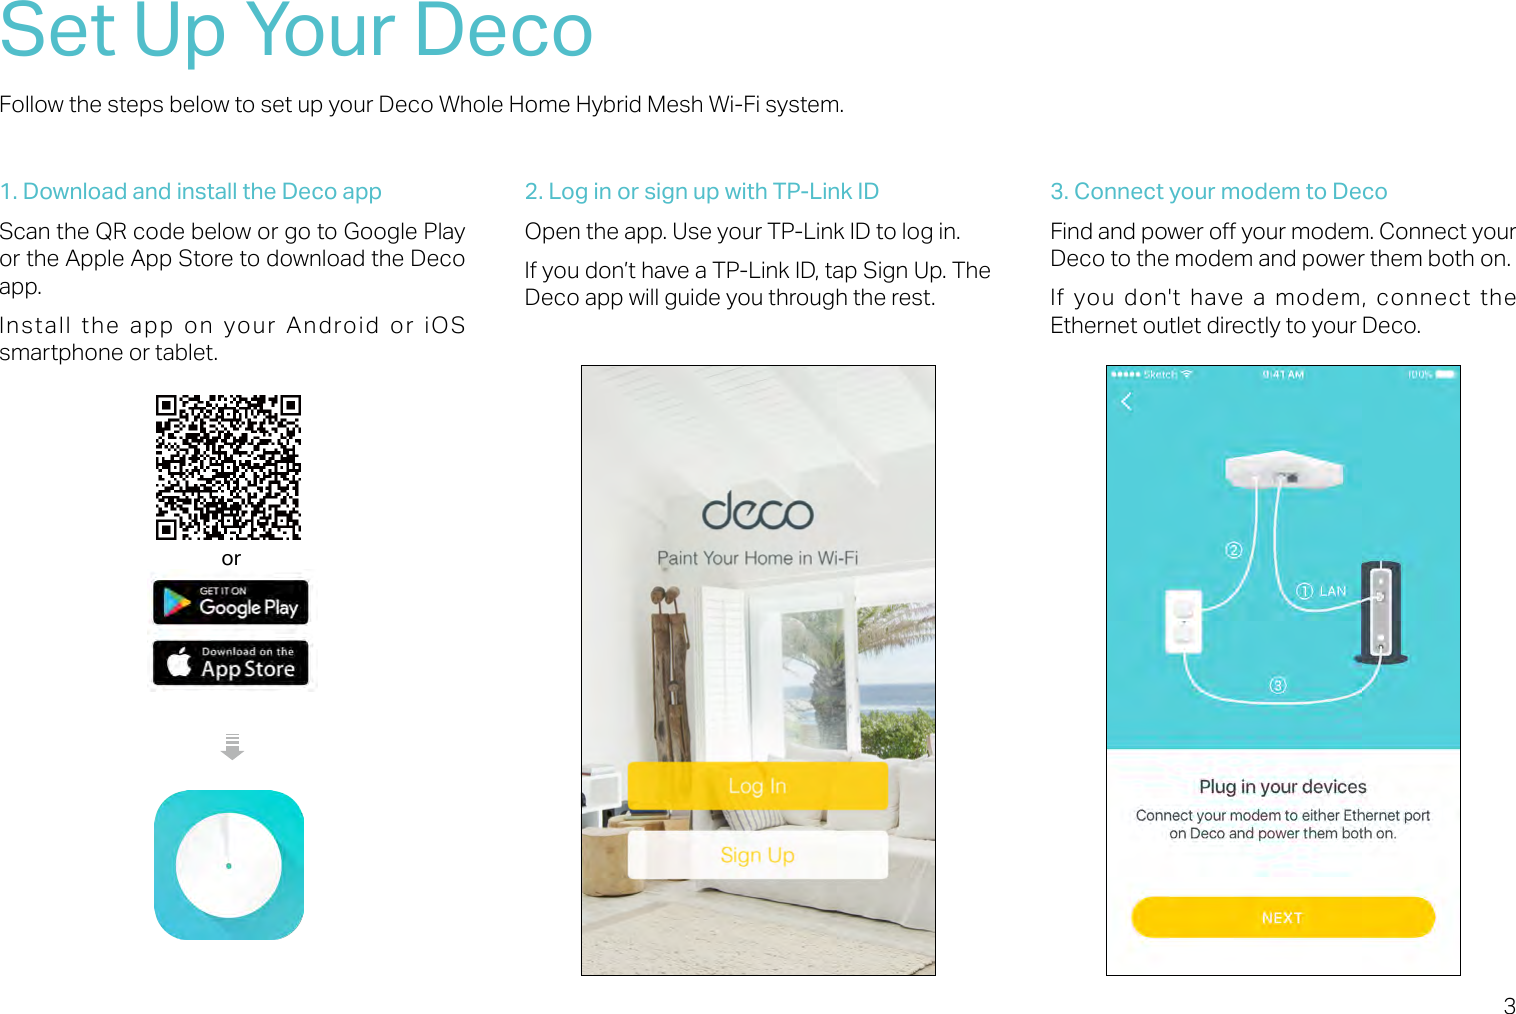 3Set Up Your DecoFollow the steps below to set up your Deco Whole Home Hybrid Mesh Wi-Fi system.1. Download and install the Deco appScan the QR code below or go to Google Play or the Apple App Store to download the Deco app. Install the app on your Android or iOS smartphone or tablet.or2. Log in or sign up with TP-Link IDOpen the app. Use your TP-Link ID to log in. If you don’t have a TP-Link ID, tap Sign Up. The Deco app will guide you through the rest.3. Connect your modem to DecoFind and power o your modem. Connect your Deco to the modem and power them both on.If you don&apos;t have a modem, connect the Ethernet outlet directly to your Deco.